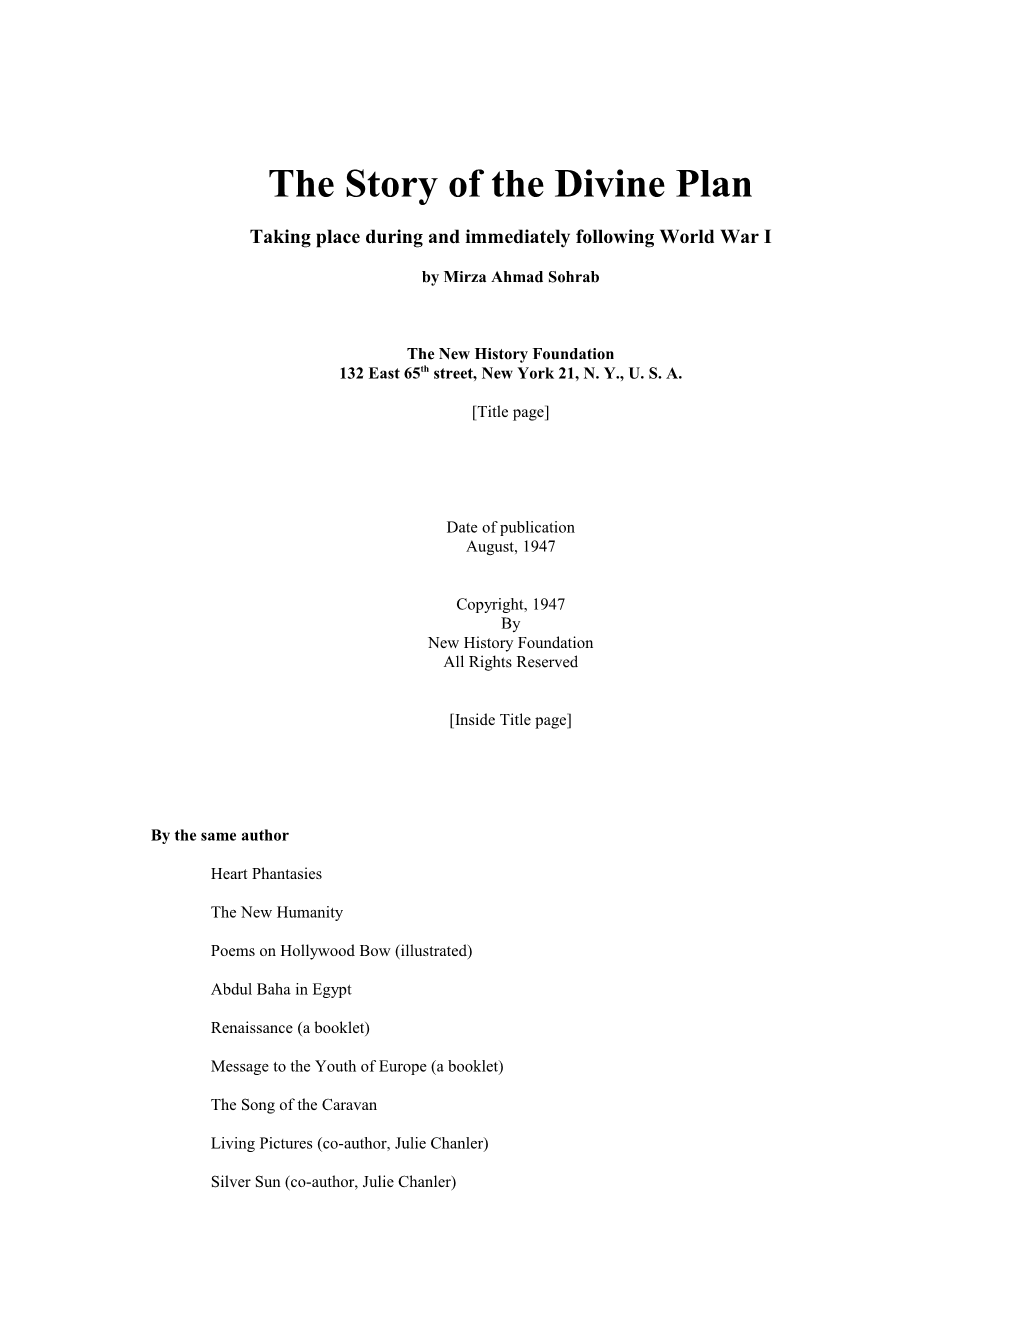 The Story of the Divine Plan, Taking Place During and Immediately Following World War I